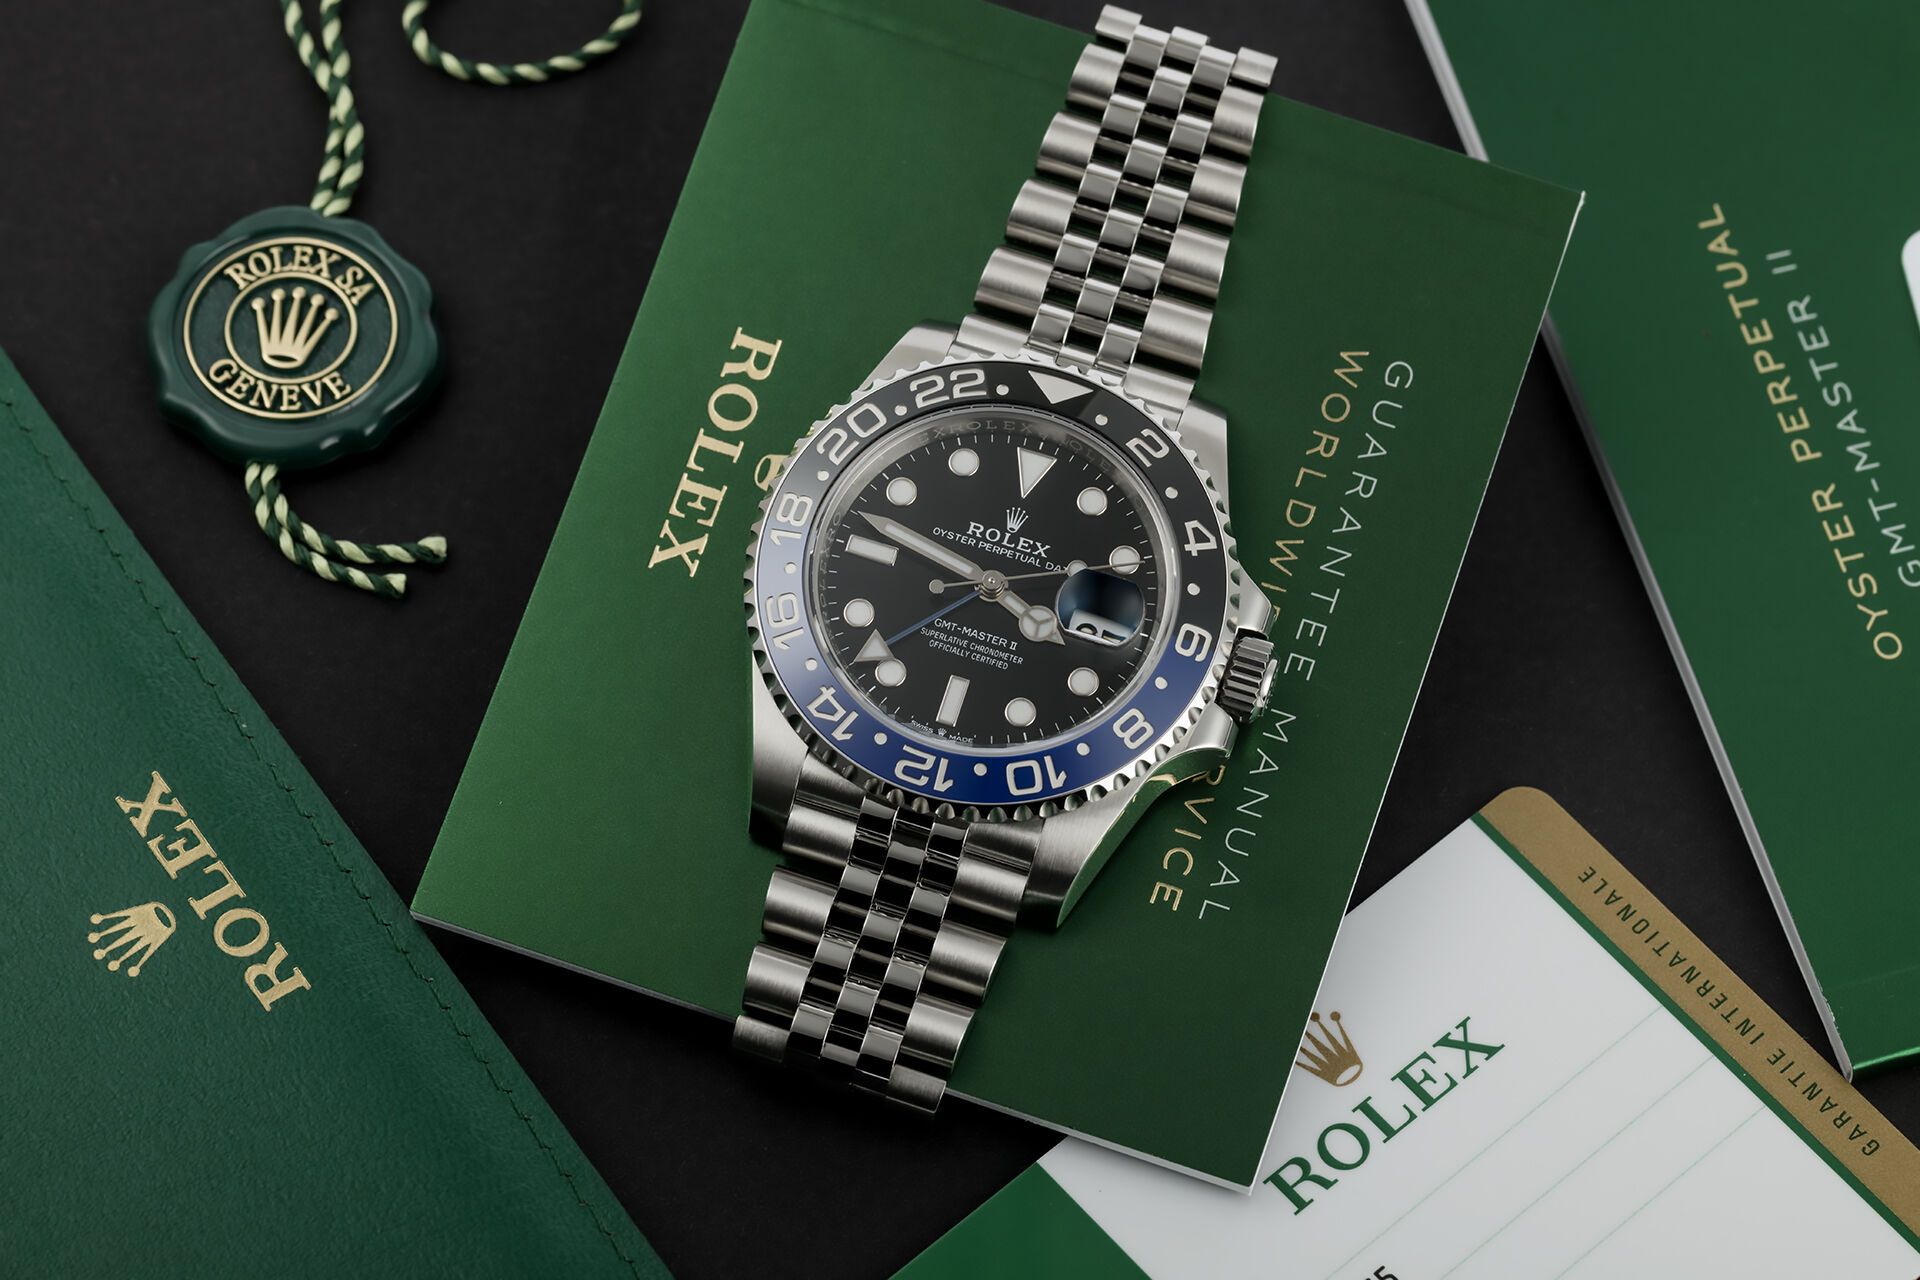 ref 126710BLNR | UK-Supplied, Box and Certificate  | Rolex GMT-Master II